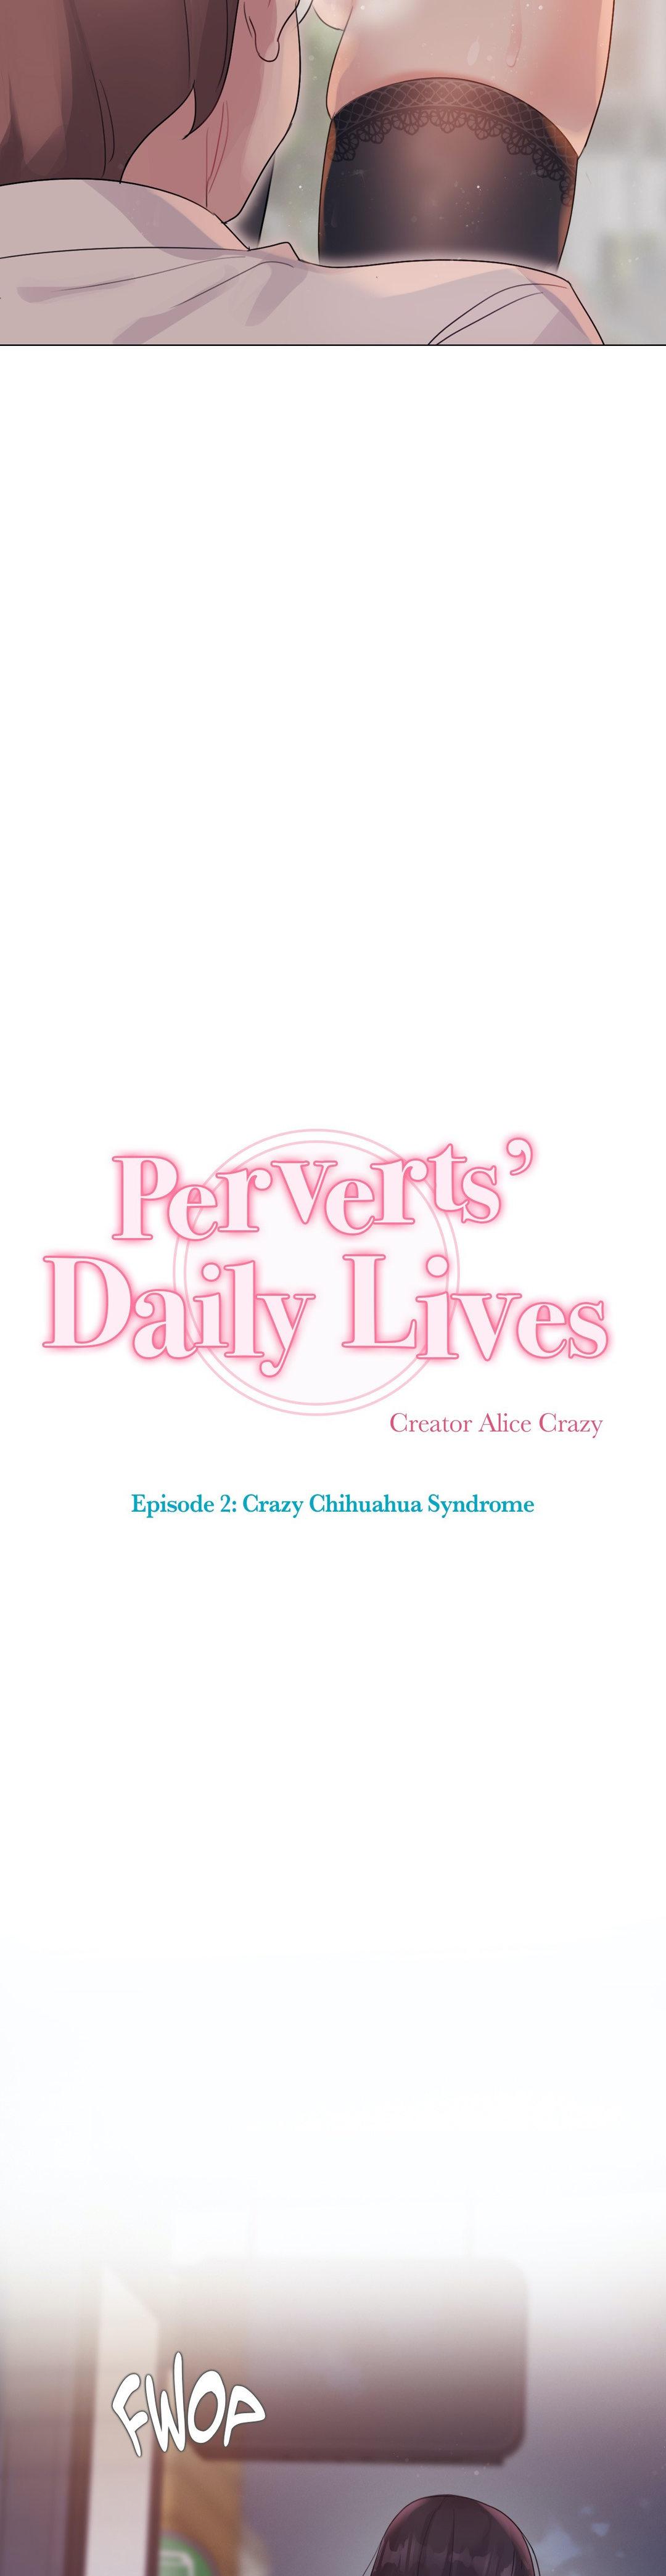 Perverts' Daily Lives Episode 2: Crazy Chihuahua Syndrome 422